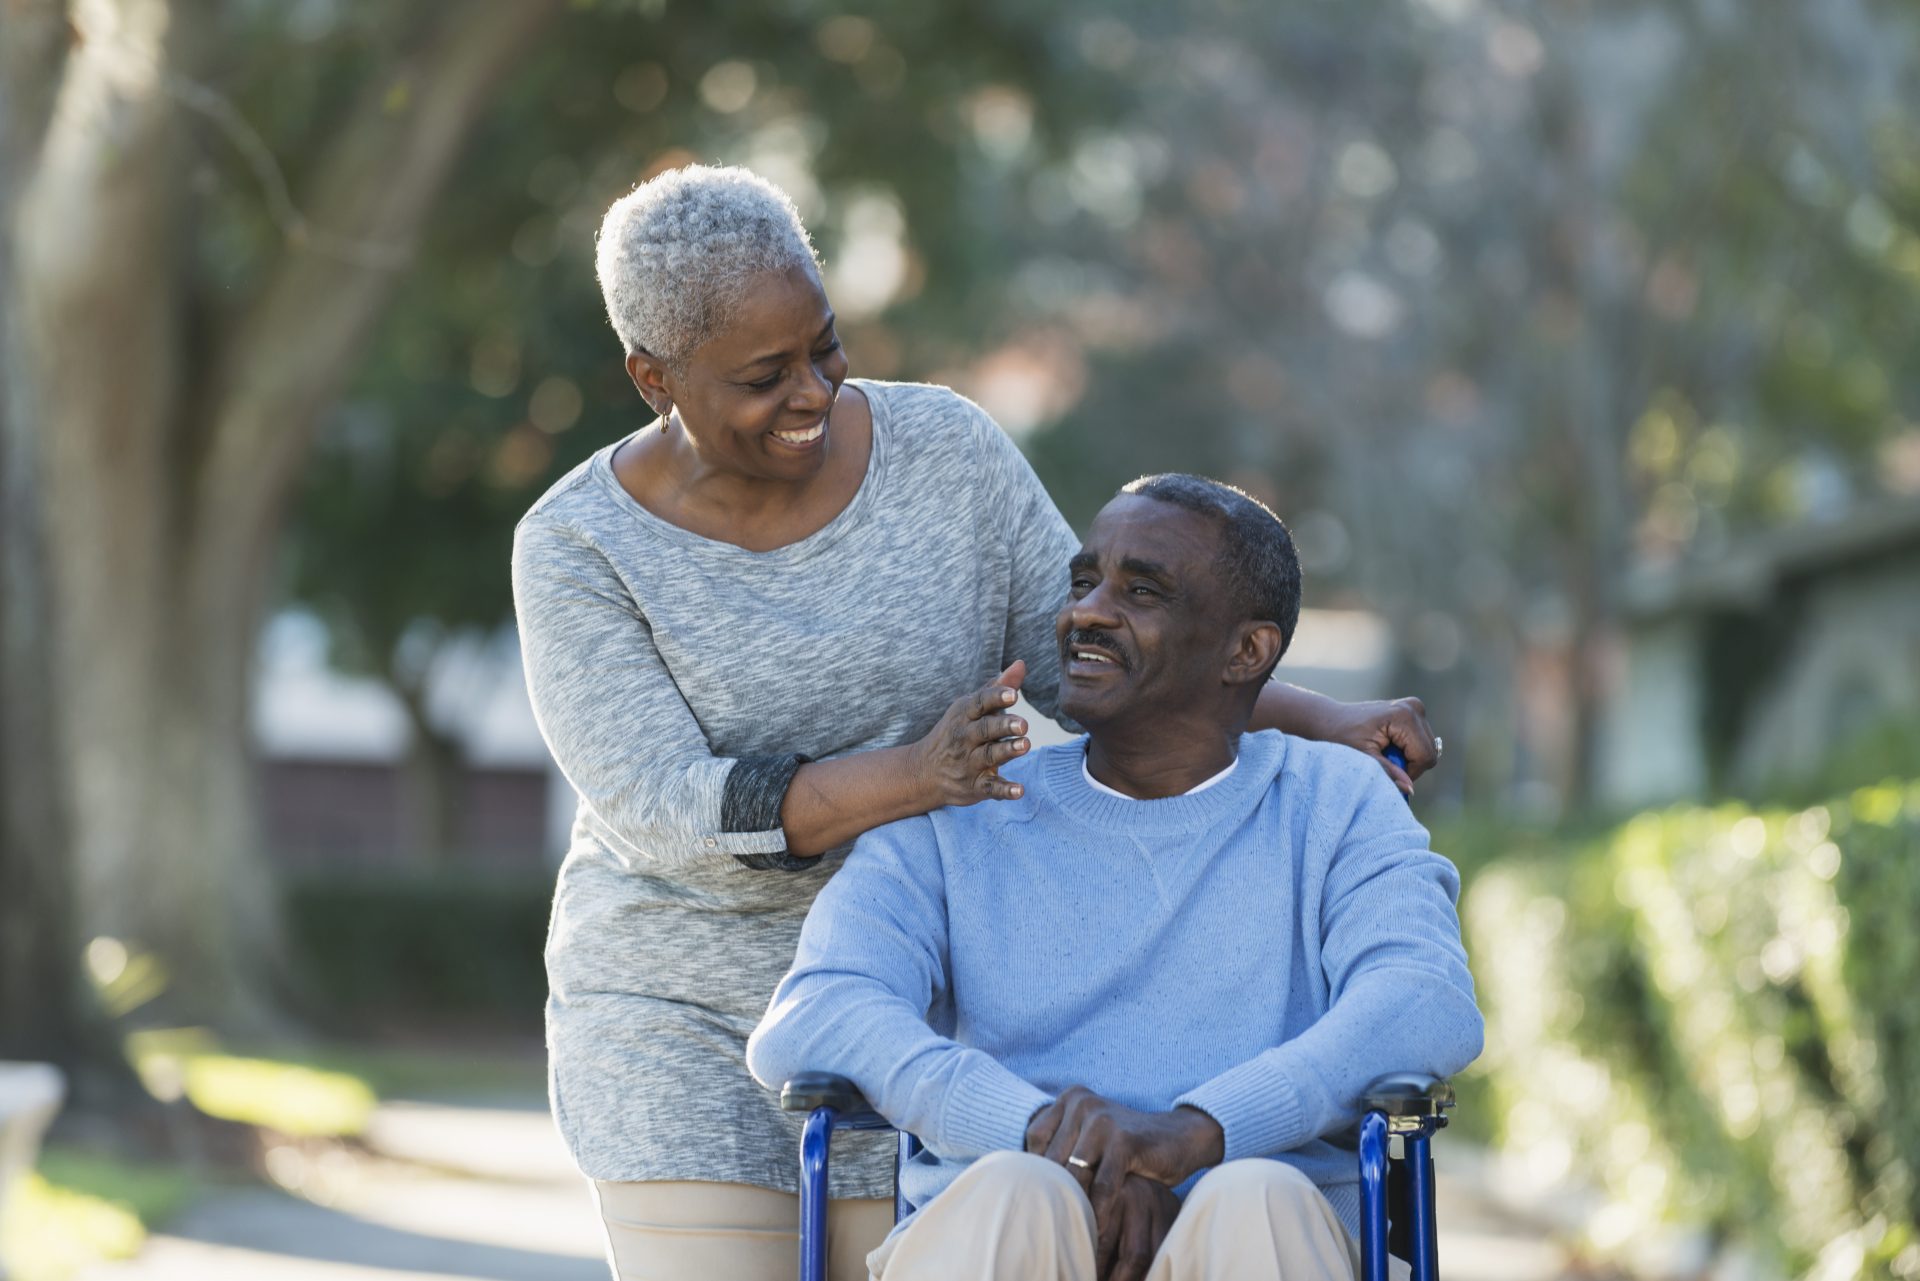 Smiling woman standing behind a man in a wheelchair outdoors at a senior living community.